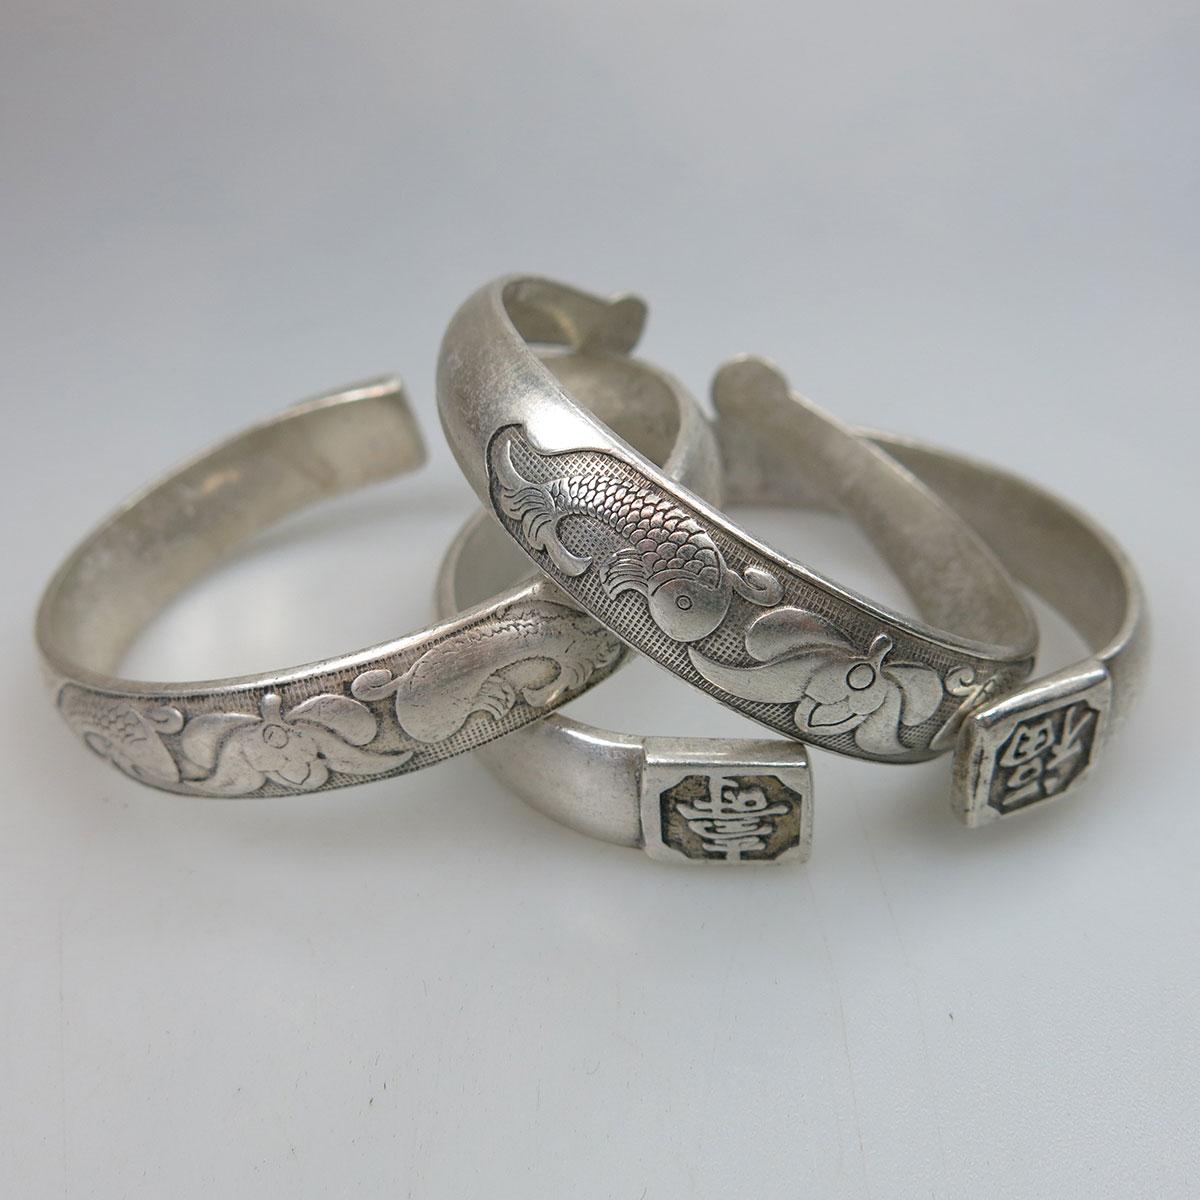 3 Chinese Silver Open Bangles